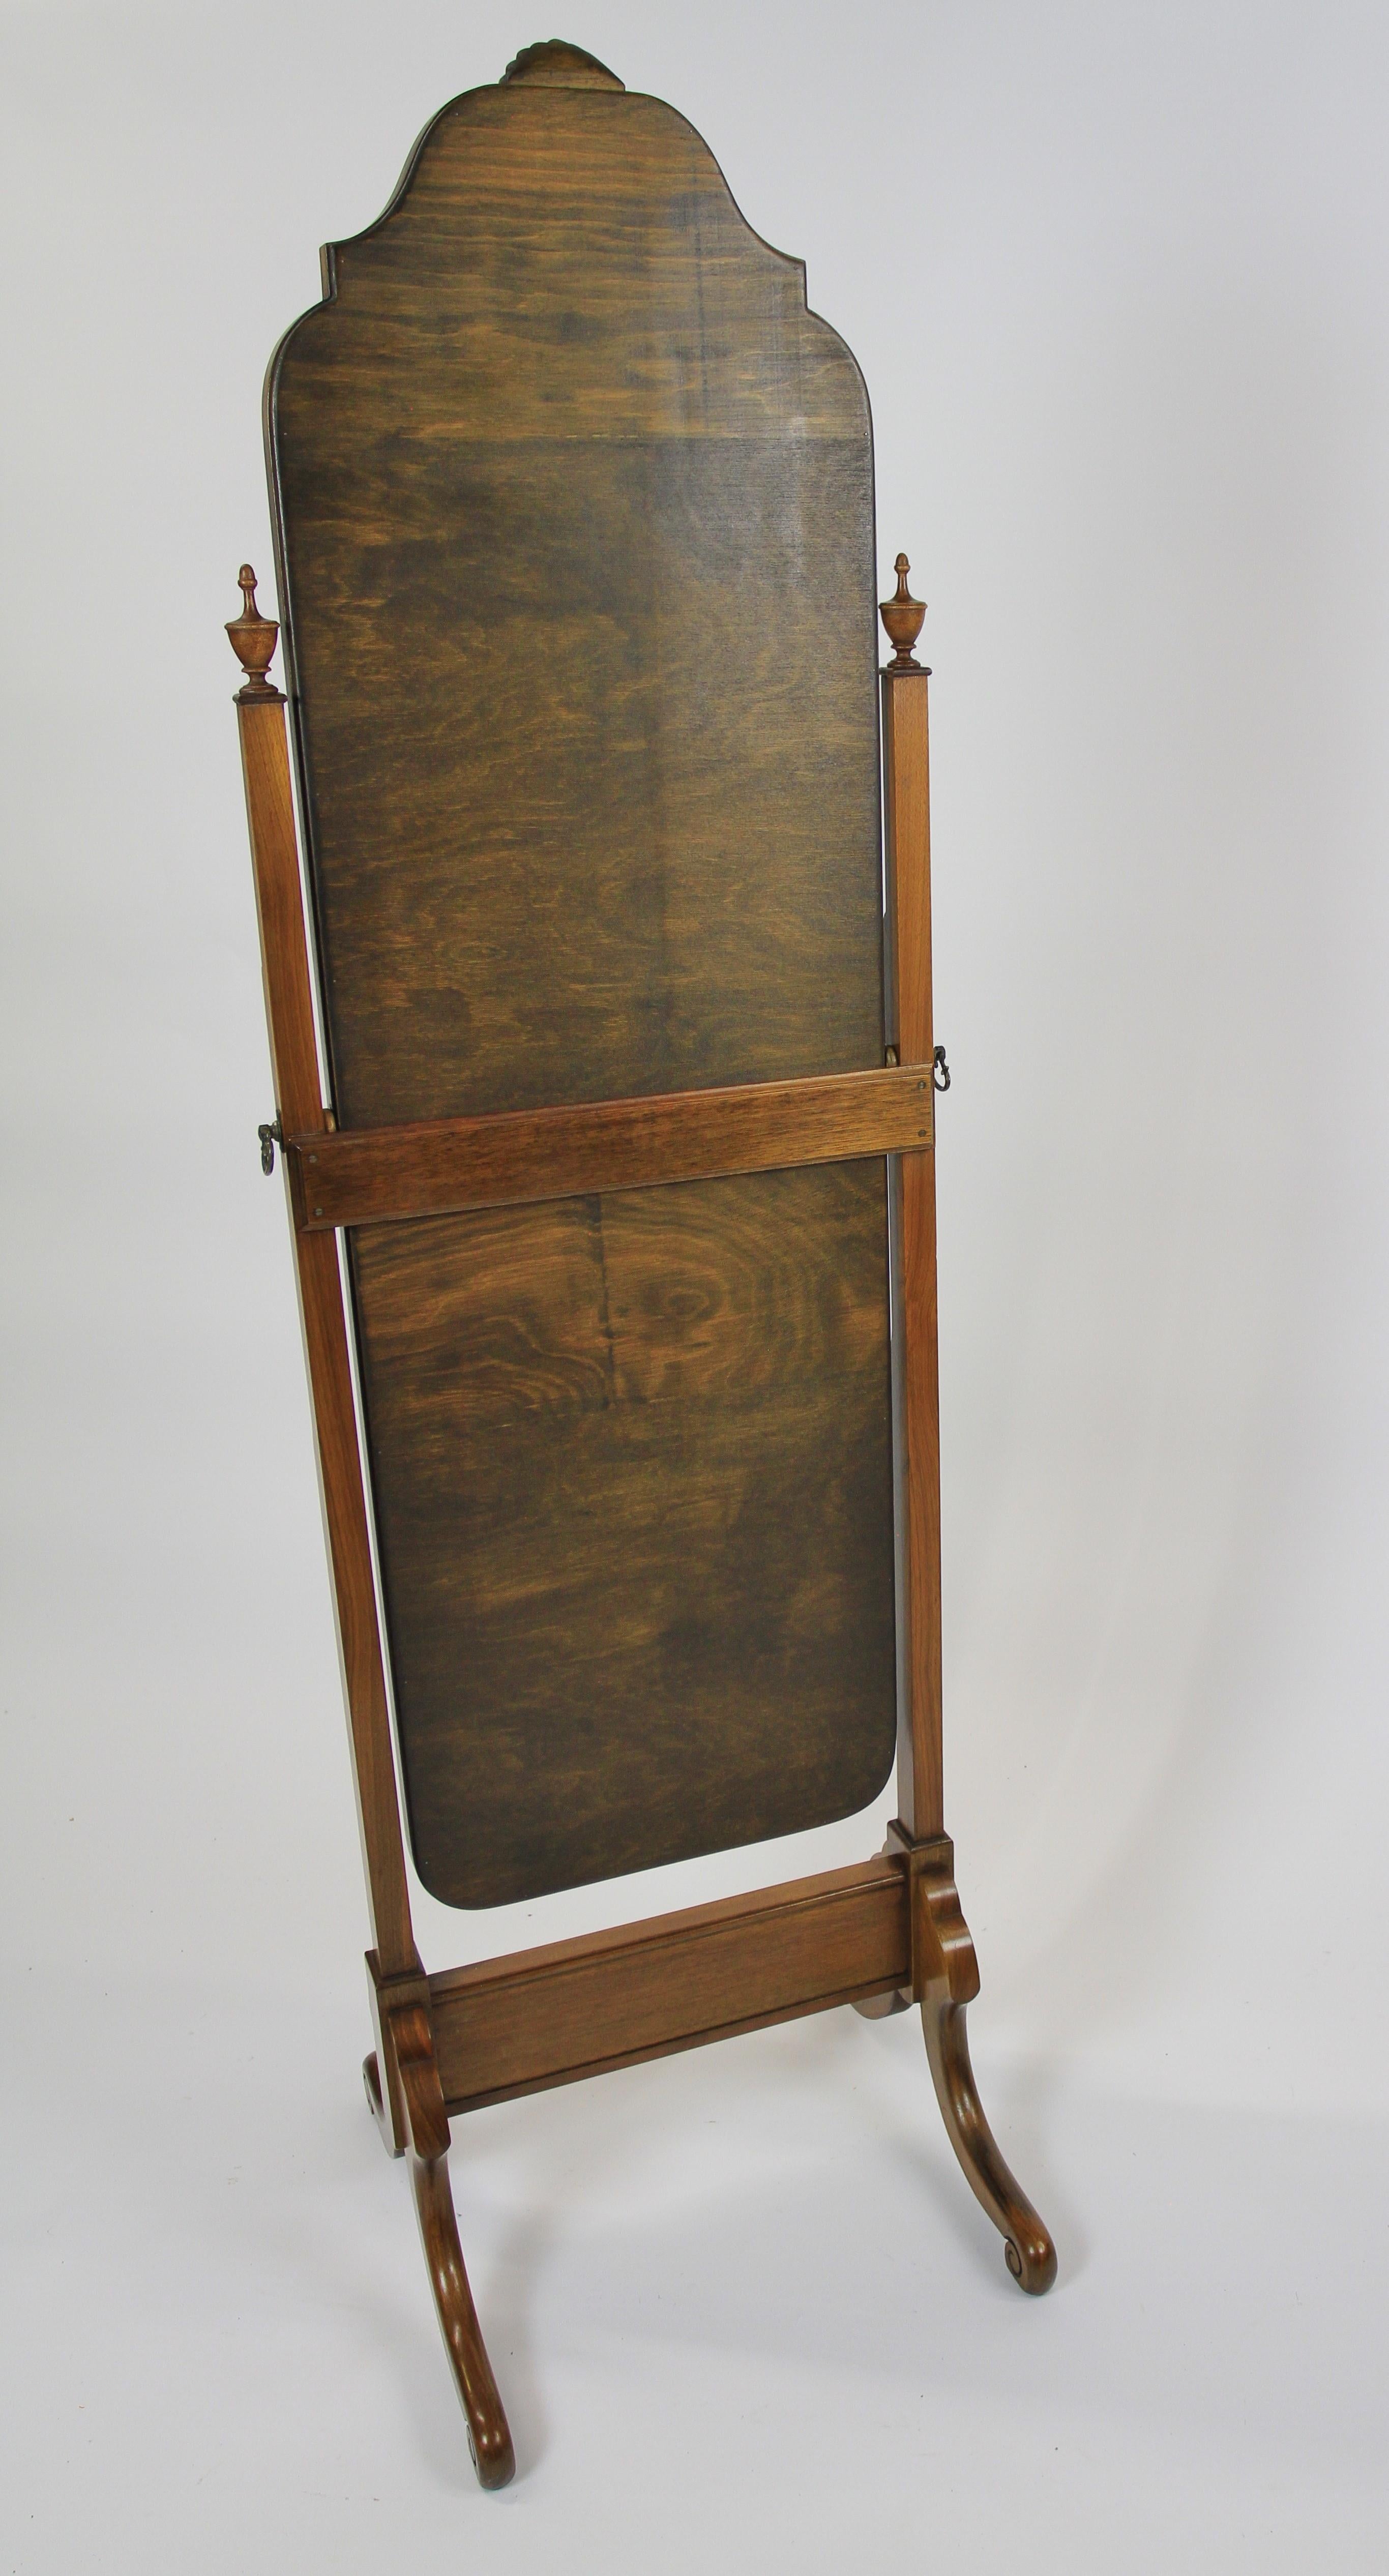 Polished Queen Anne Style Walnut Cheval Mirror circa 1930s